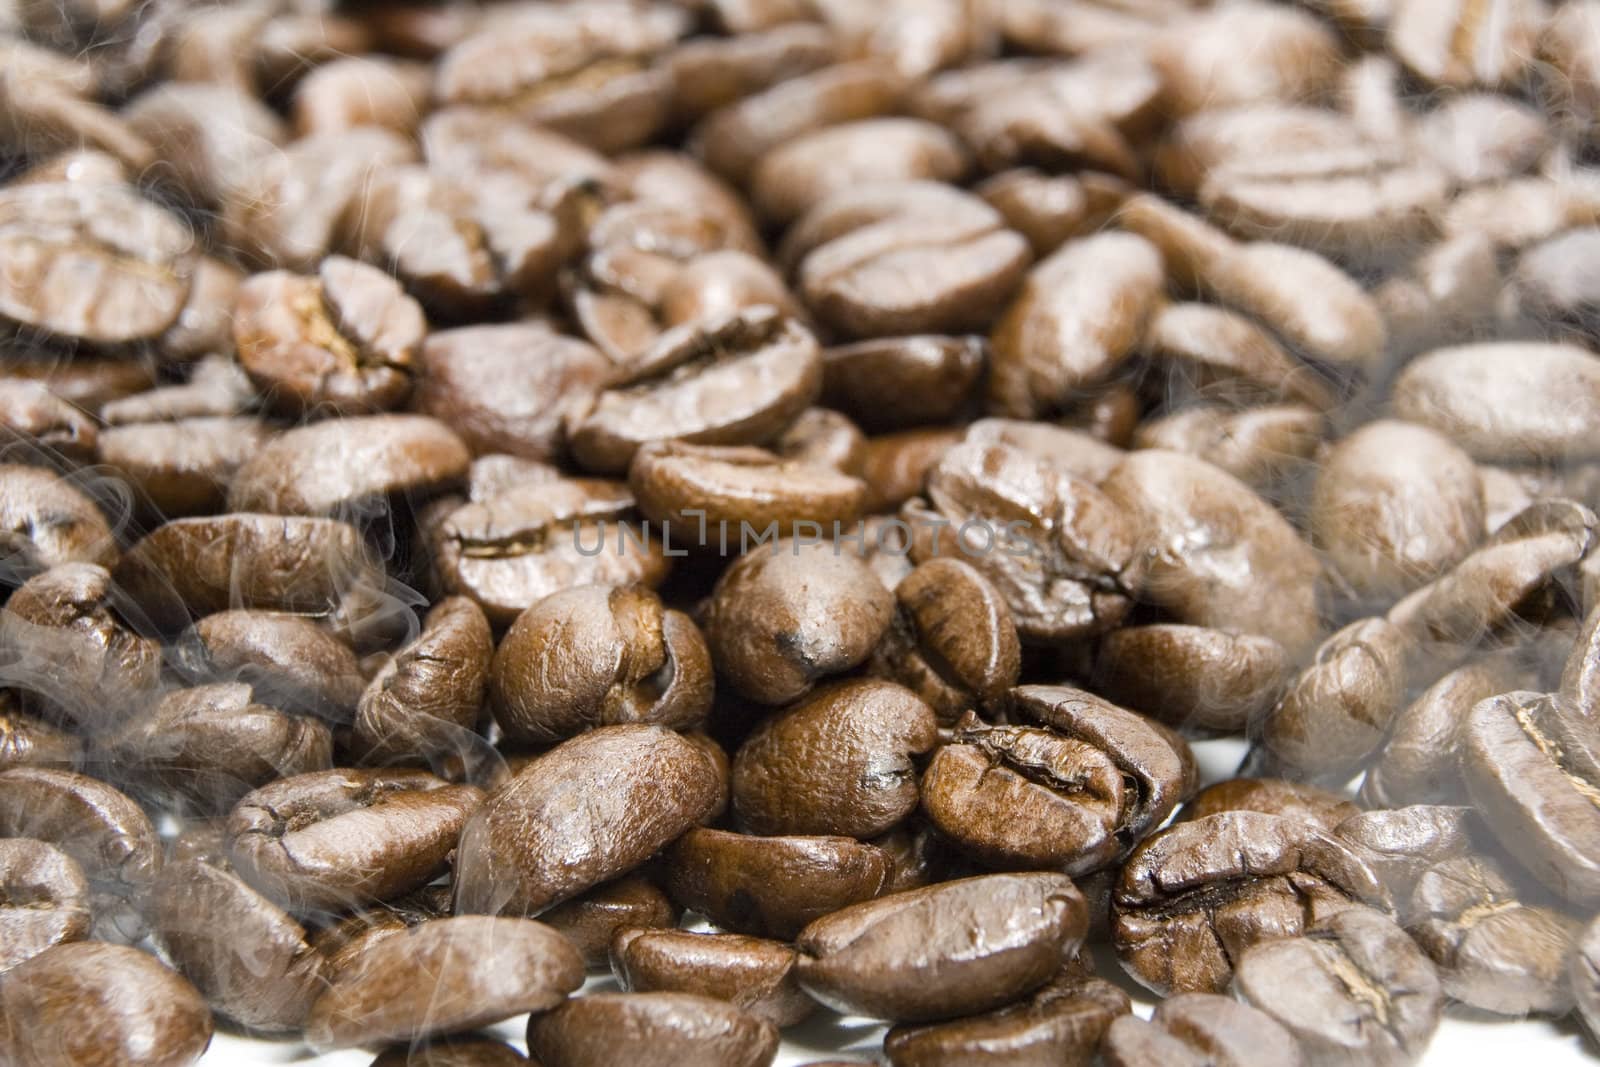 Fresh roasted coffee beans on a white background